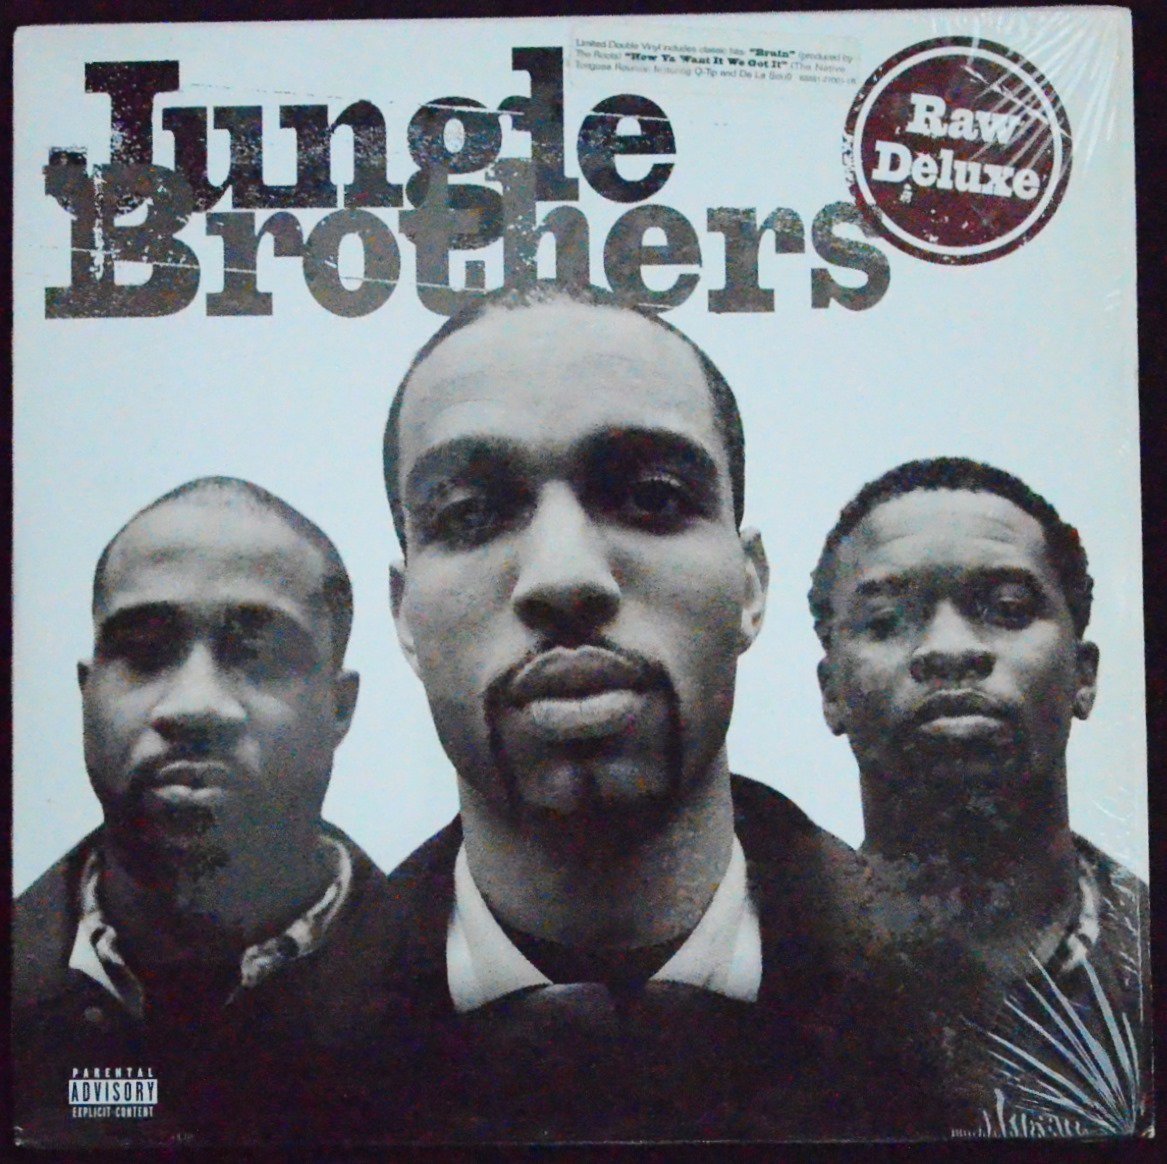 Jungle Brothers ‎Raw Deluxe 2LP【USオリジナル】